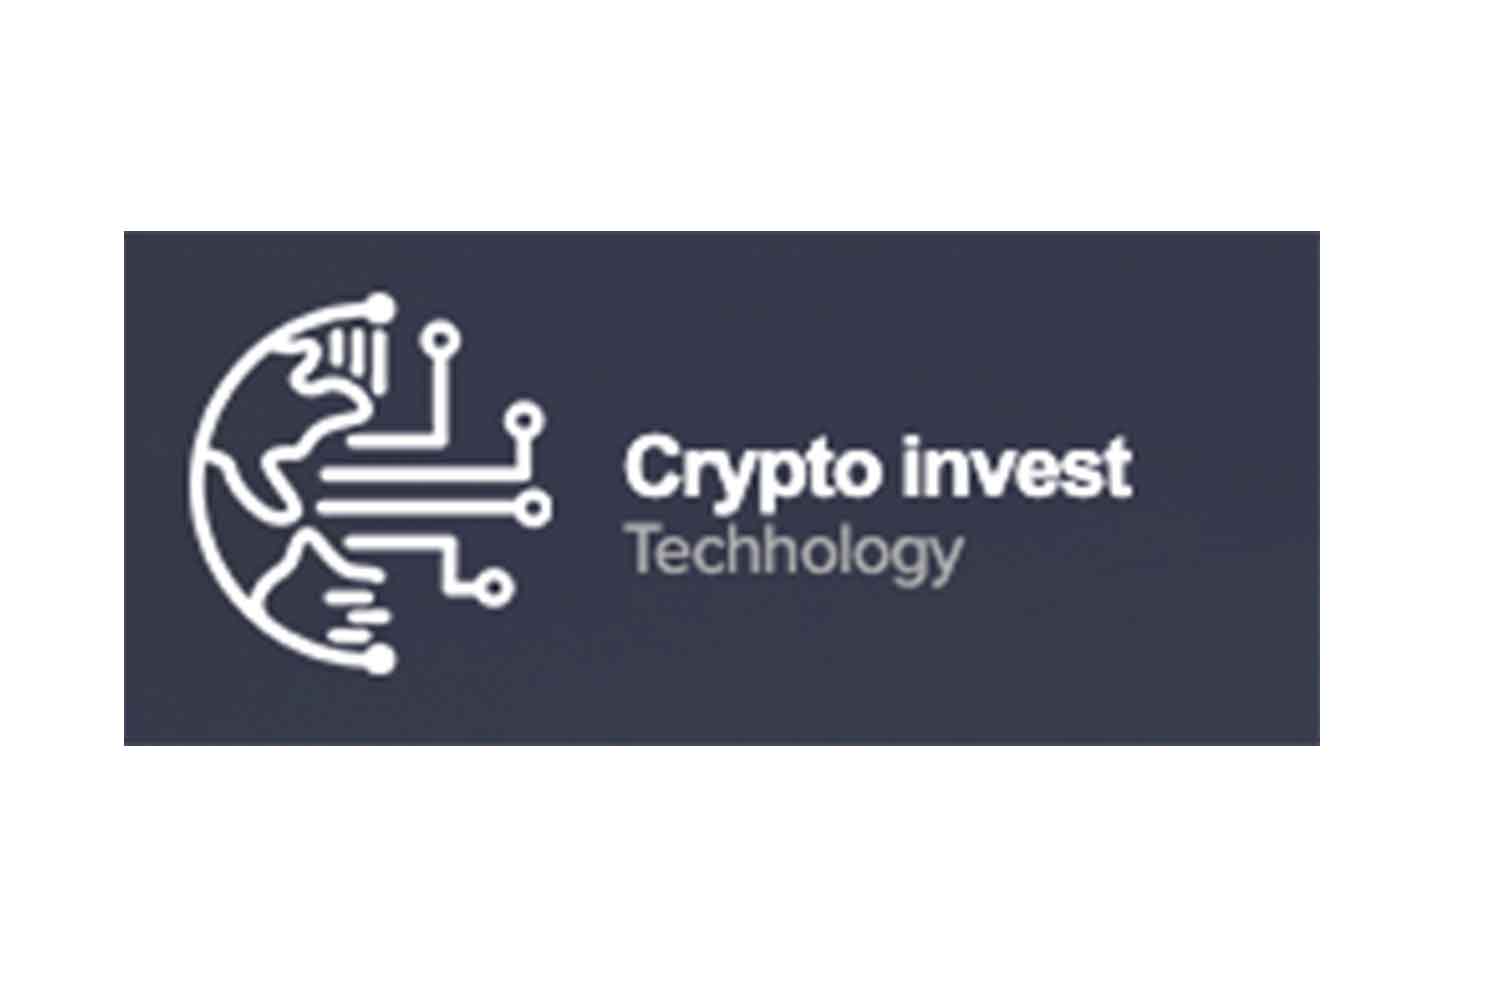 8 Best Cryptocurrency to Invest in for February - The Economic Times